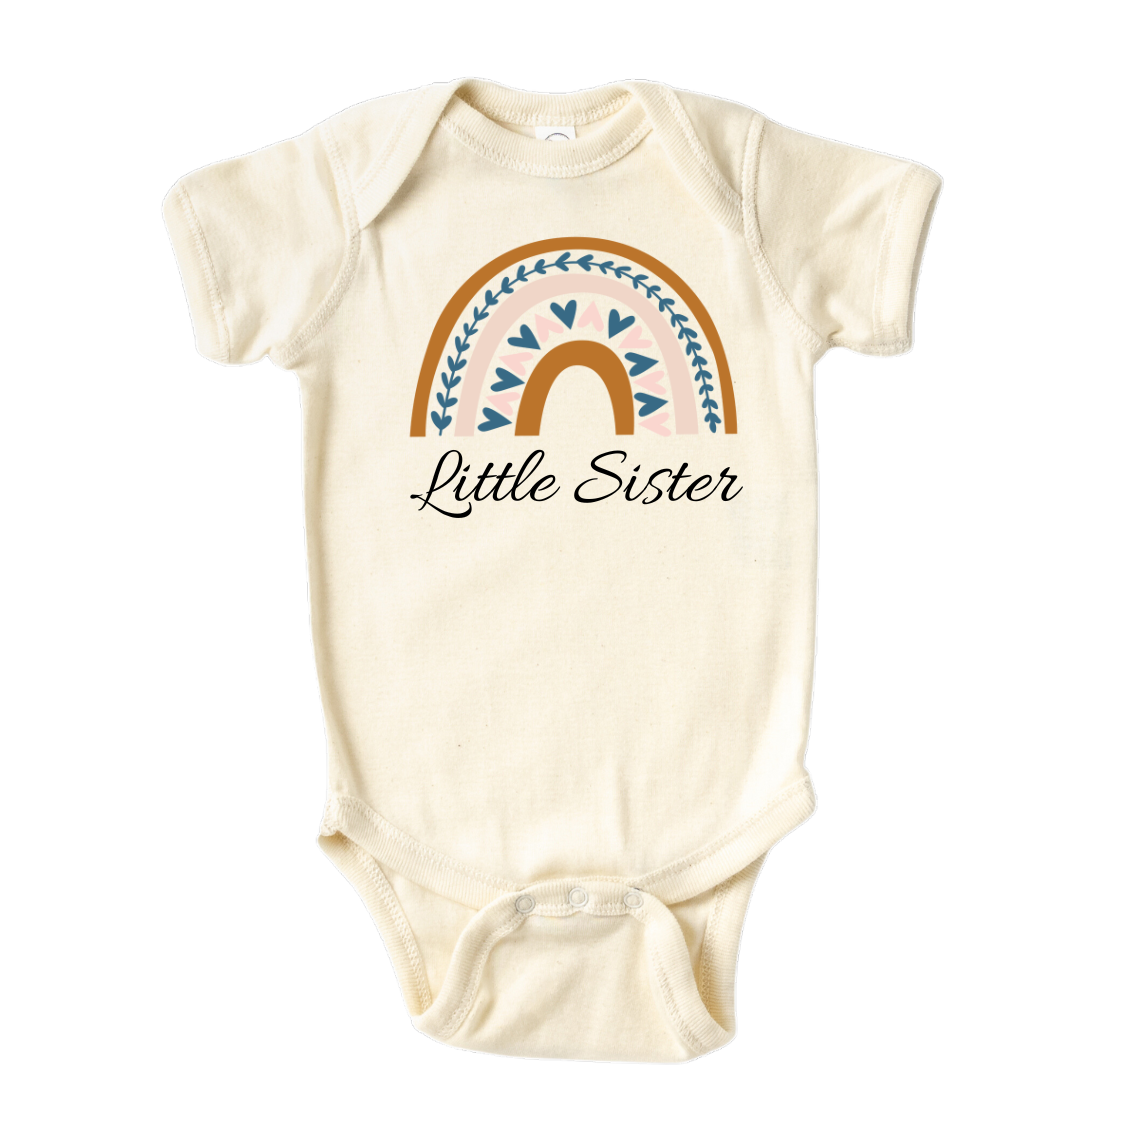 Natural Baby Onesie with a boho printed graphic of a colorful rainbow and the text 'Little Sister.' This enchanting t-shirt celebrates the arrival of a precious little sister.